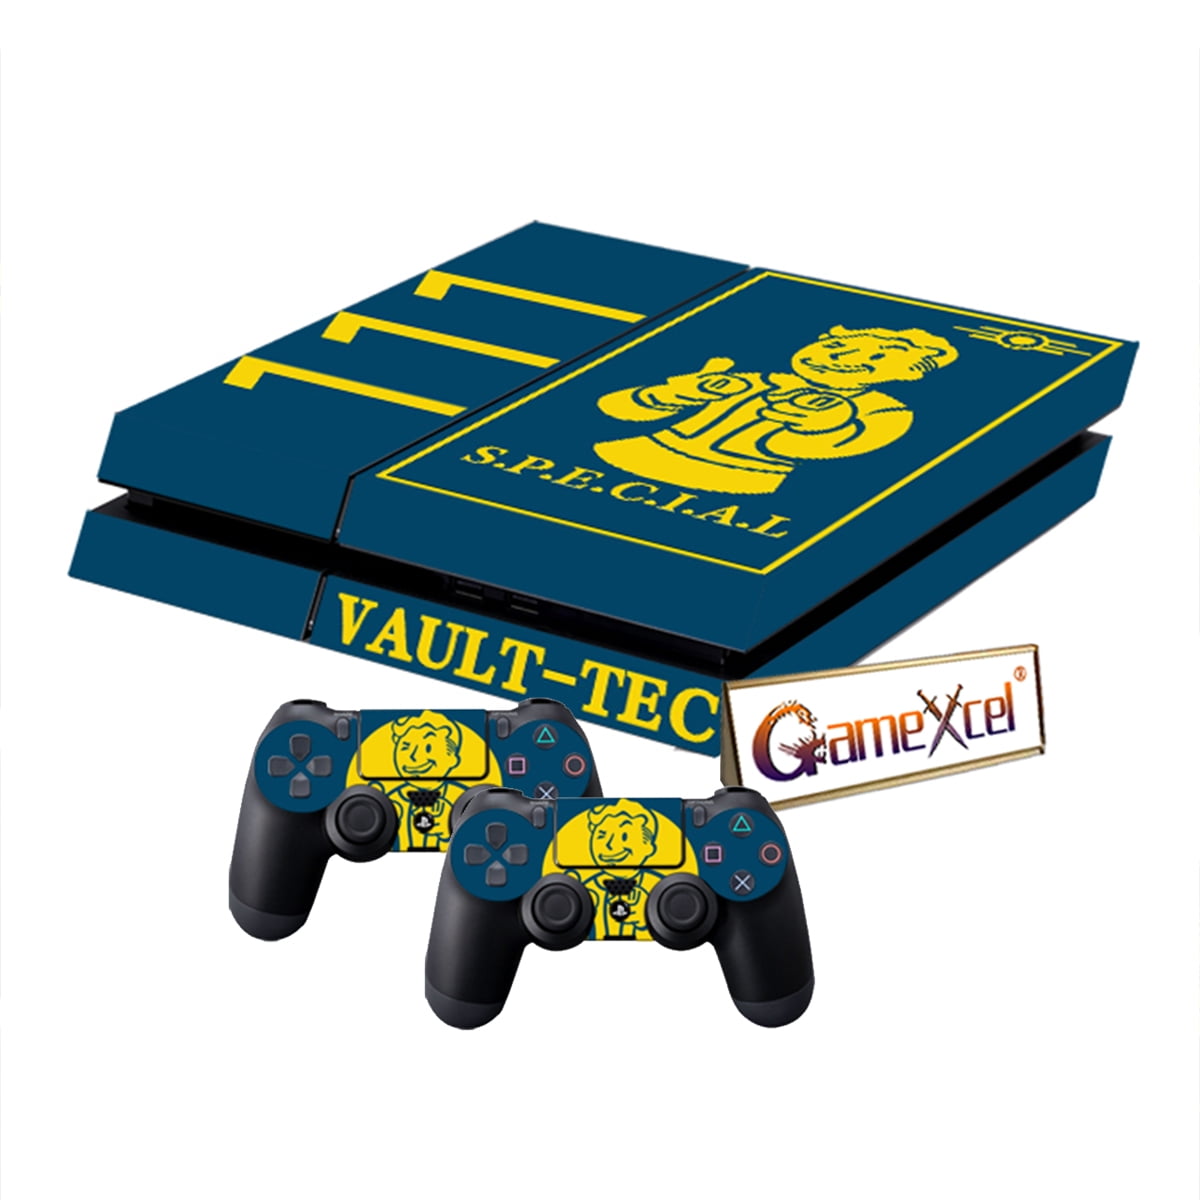 Grand Theft Auto 6 PS4 Pro Skin Sticker Cover Decal - ConsoleSkins.co